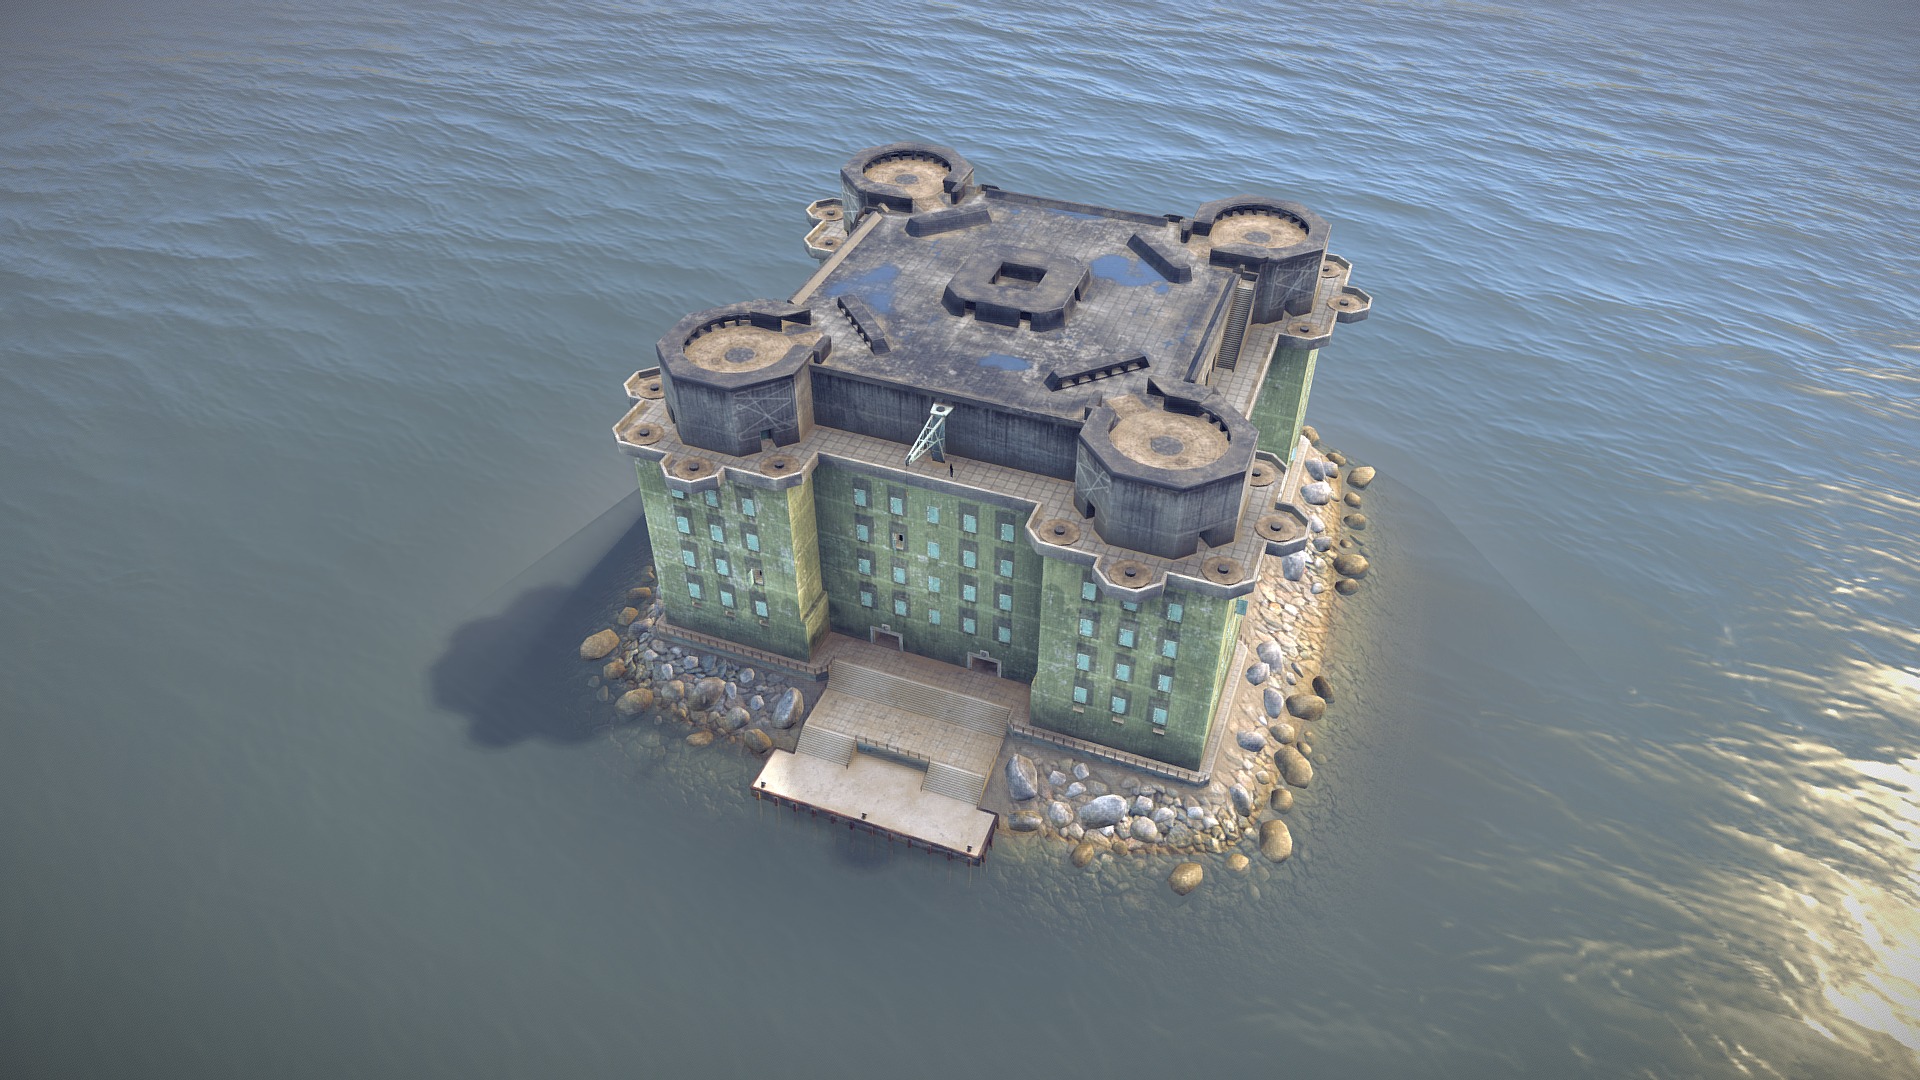 3D model WW2 FlakTurm IV Island - This is a 3D model of the WW2 FlakTurm IV Island. The 3D model is about a military ship in the water.